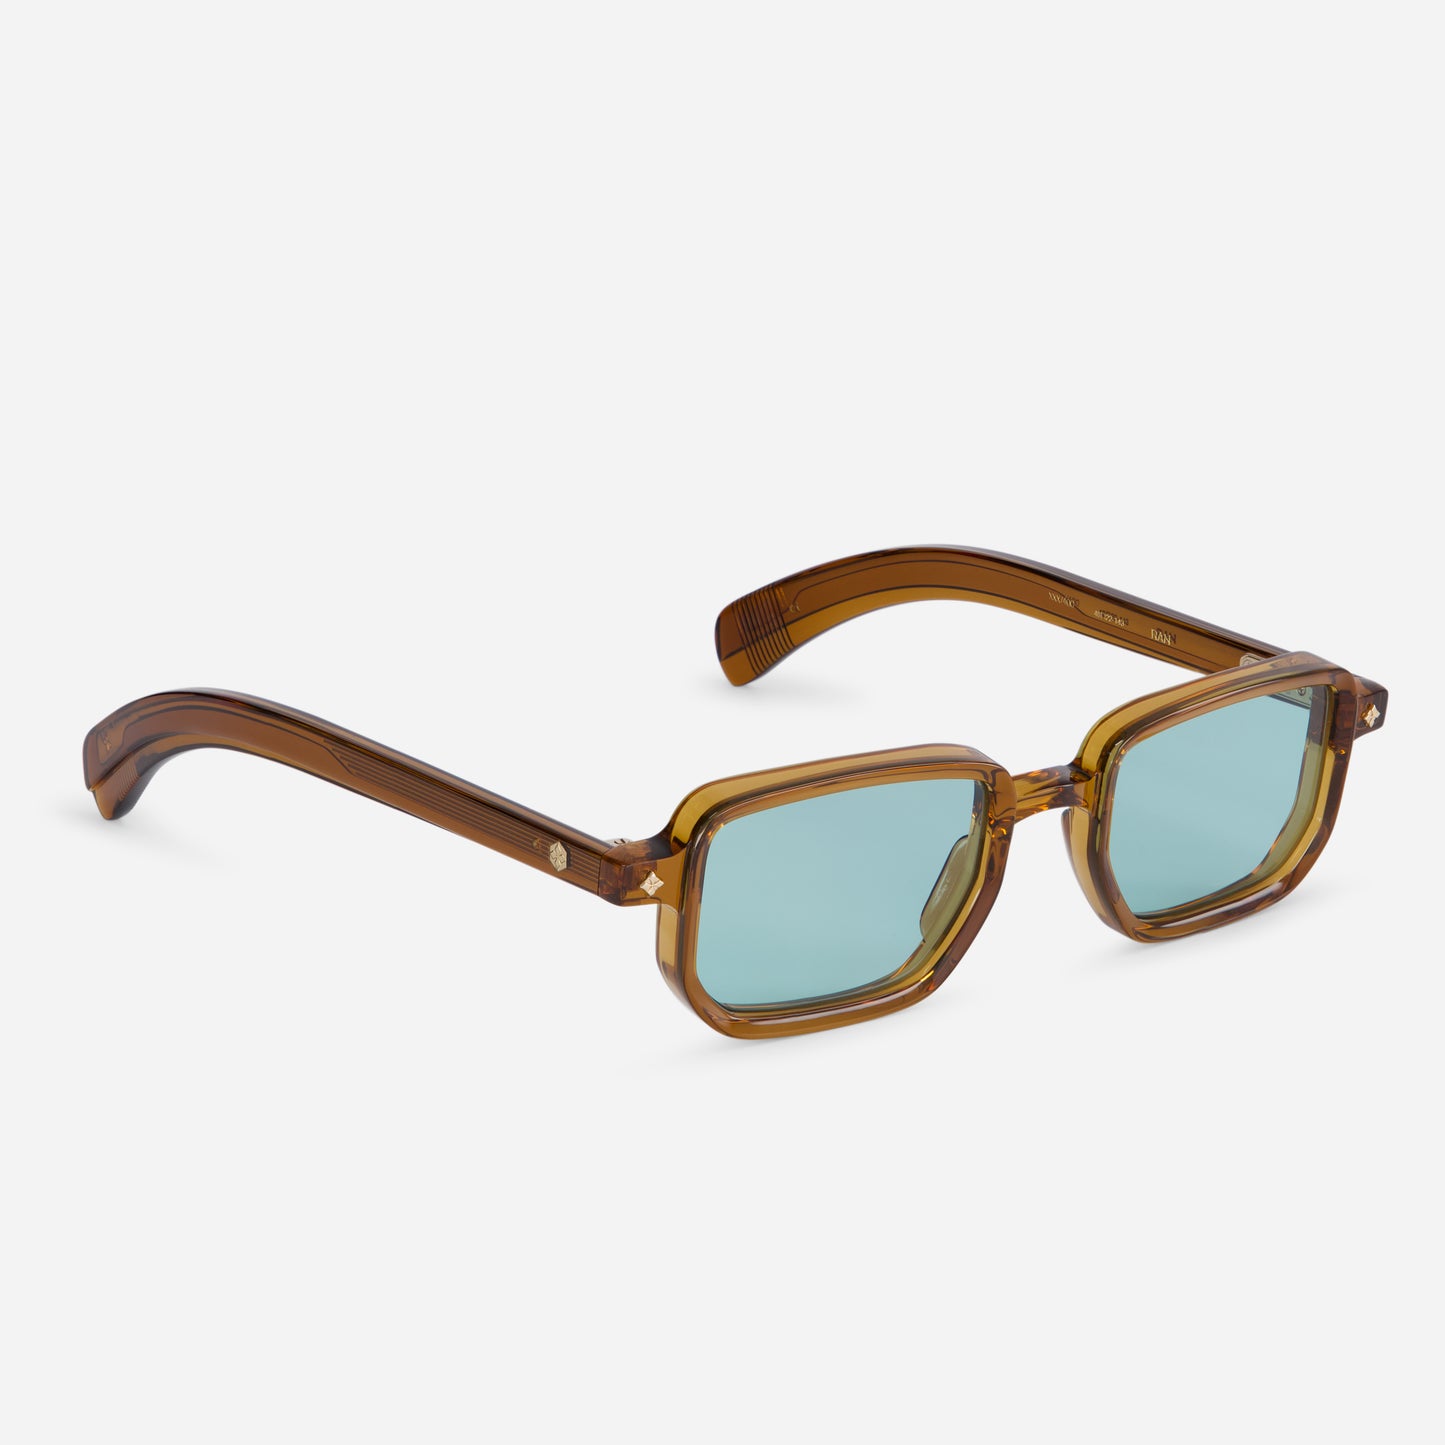 Discover the combination of a Japanese acetate frame in Maple Crystal color (clear brown) with Blue flash lenses in the Ran MC-1. SATO SUNGLASSES